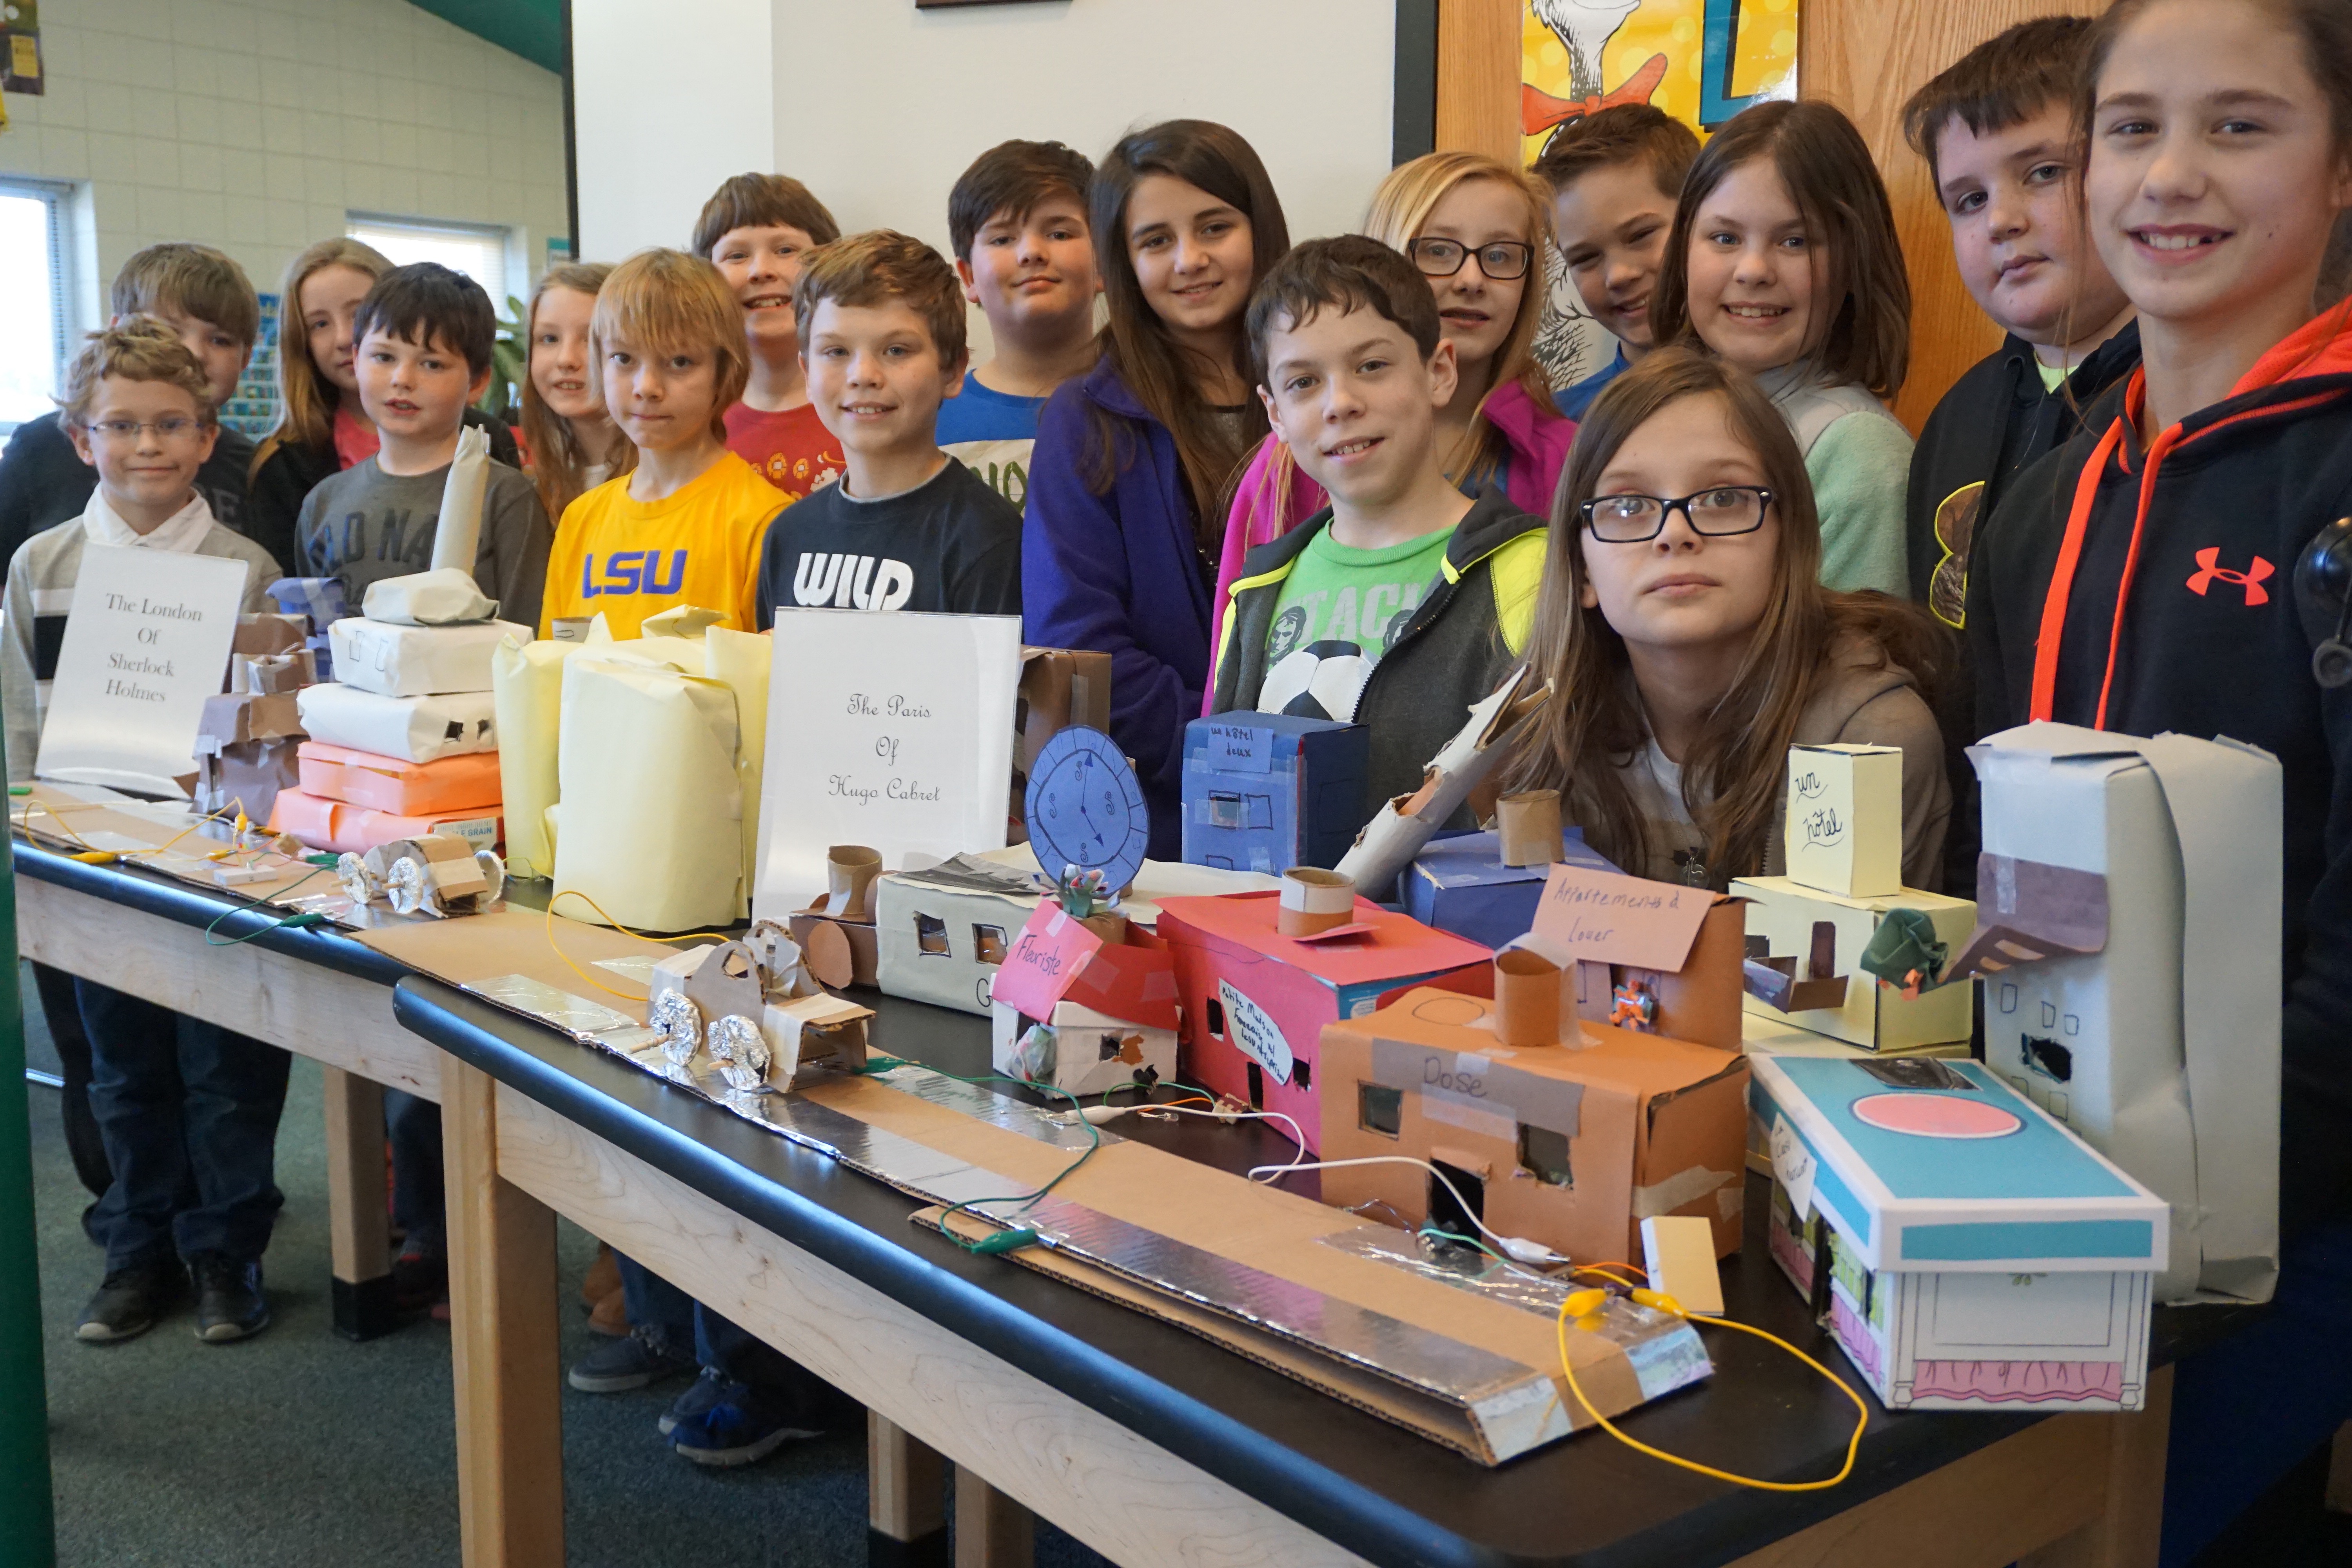 Students pose next to coding projects